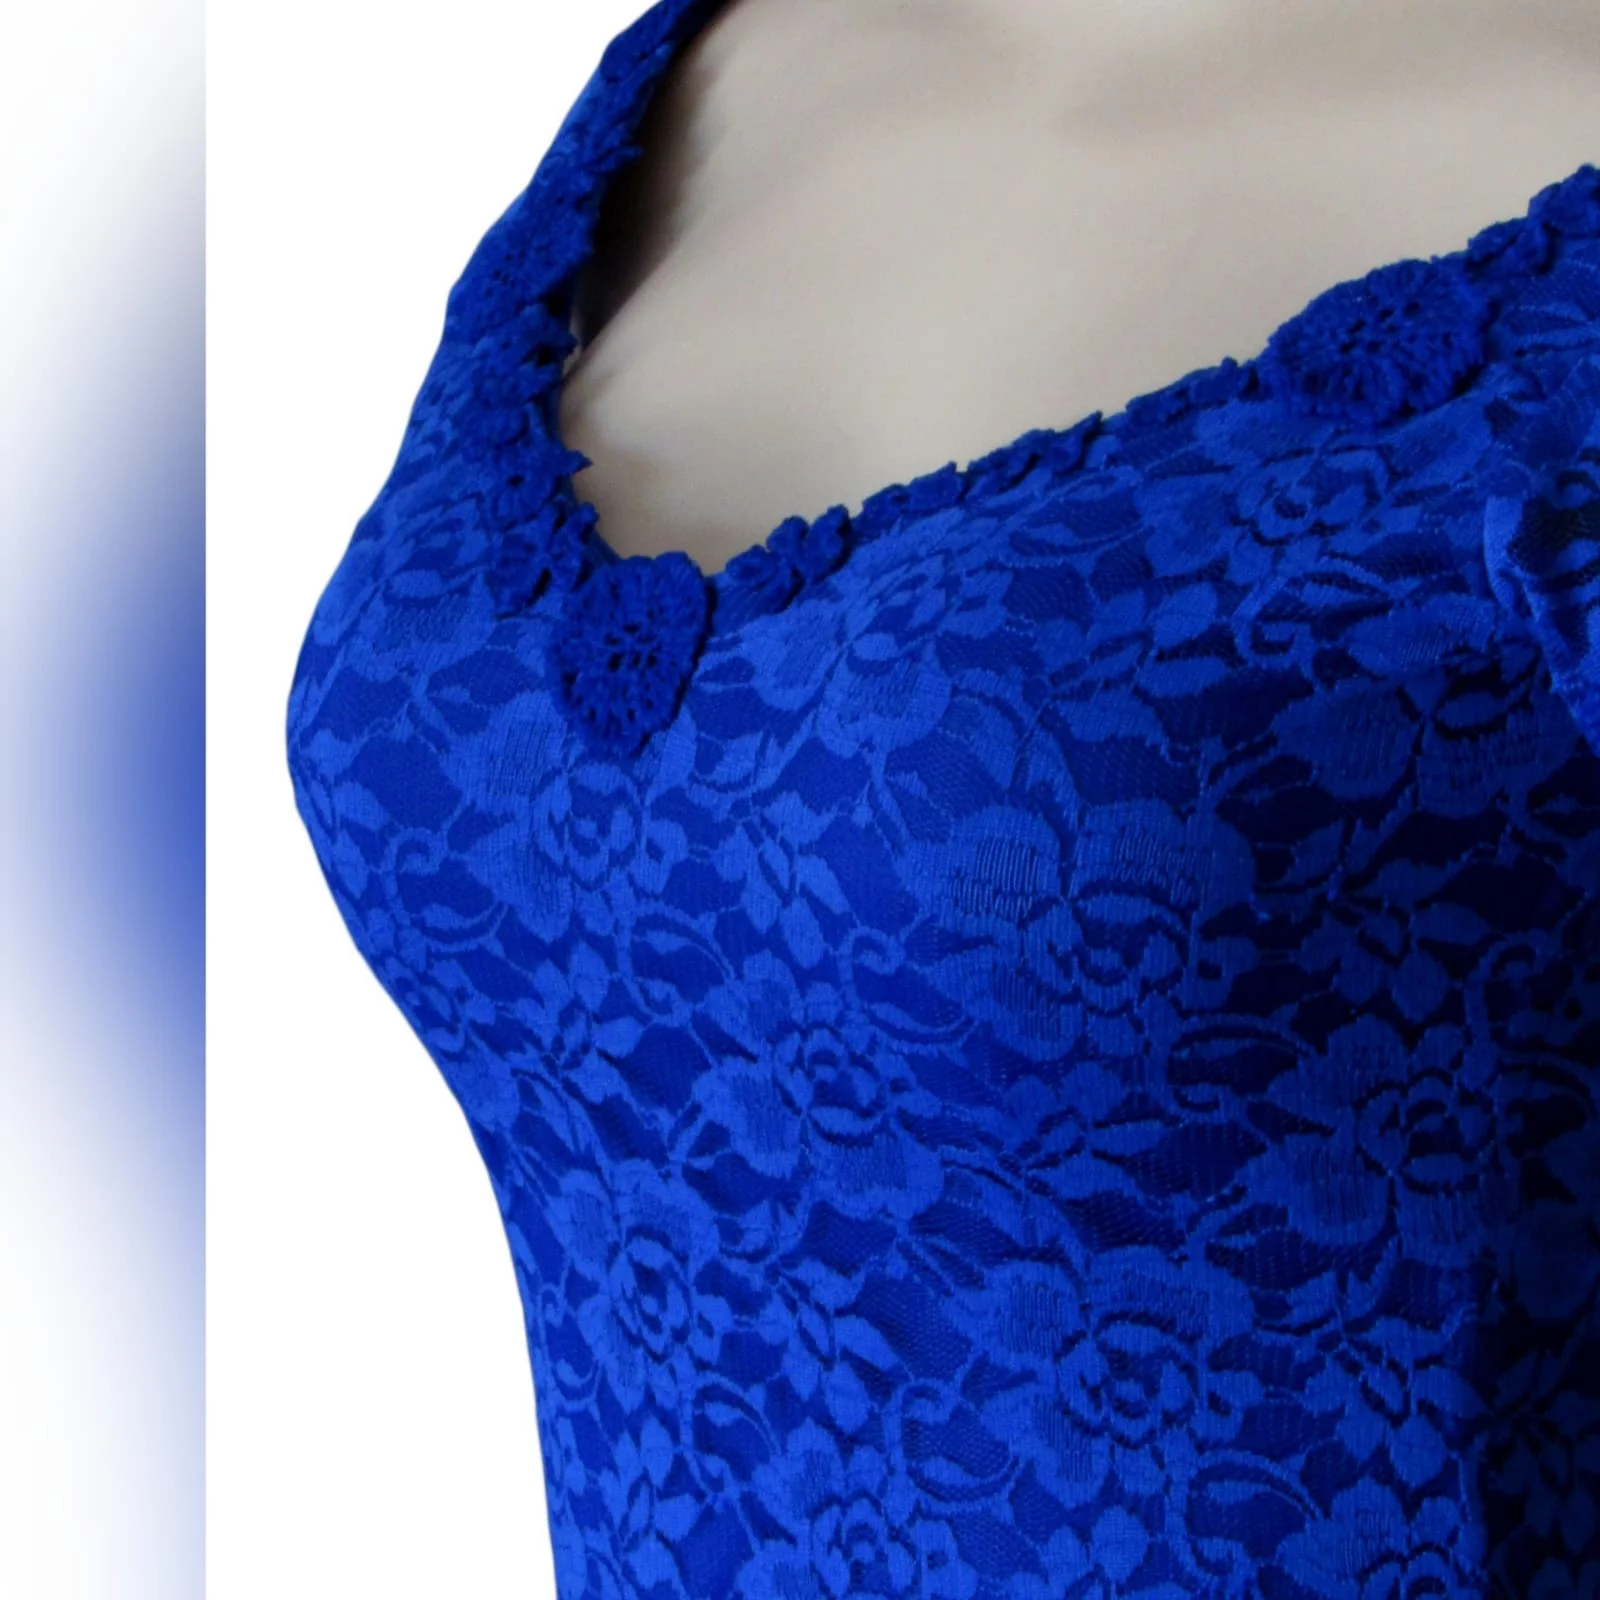 Royal blue fully lace prom dress 6 royal blue fully lace prom dress. An elegant simple design fitted till the hip with a slight flare. An off-shoulder neckline and cap sleeves detailed with guipure lace.